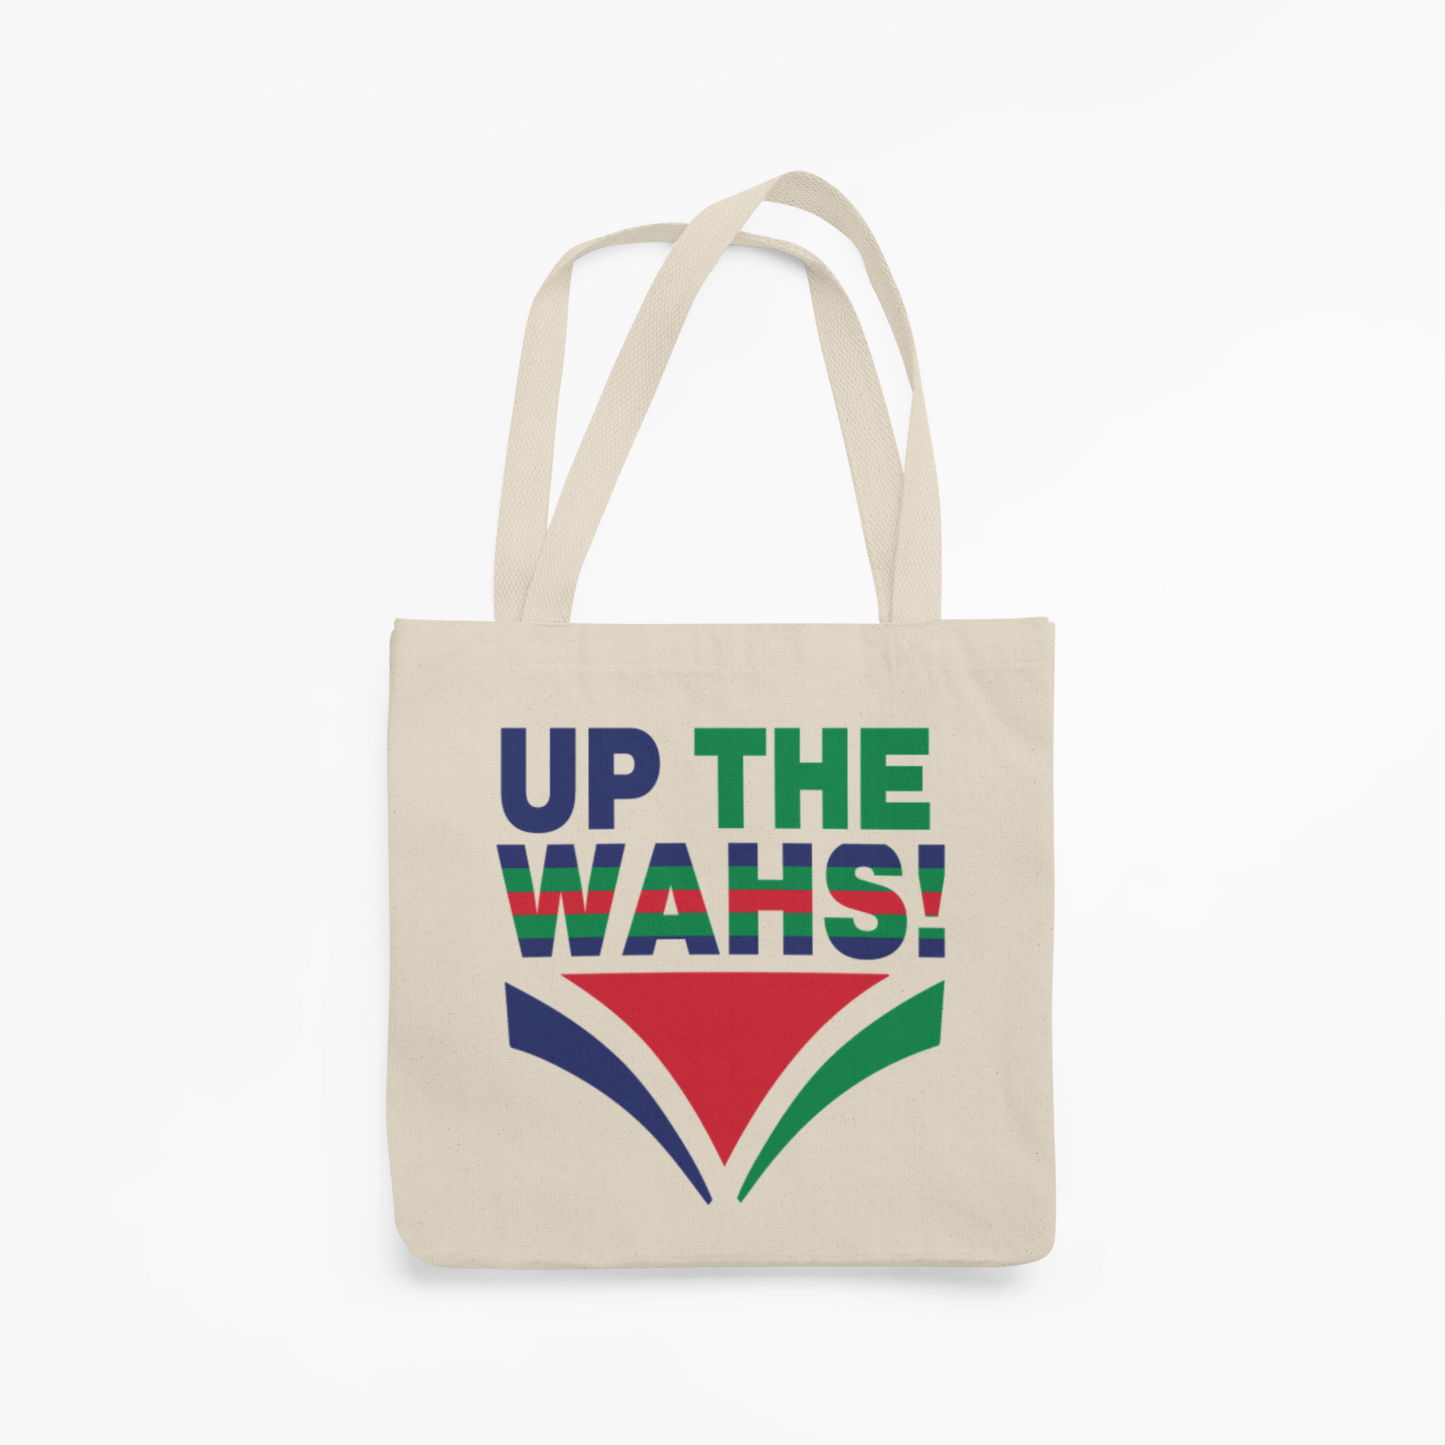 UP THE WAHS!  - Tote